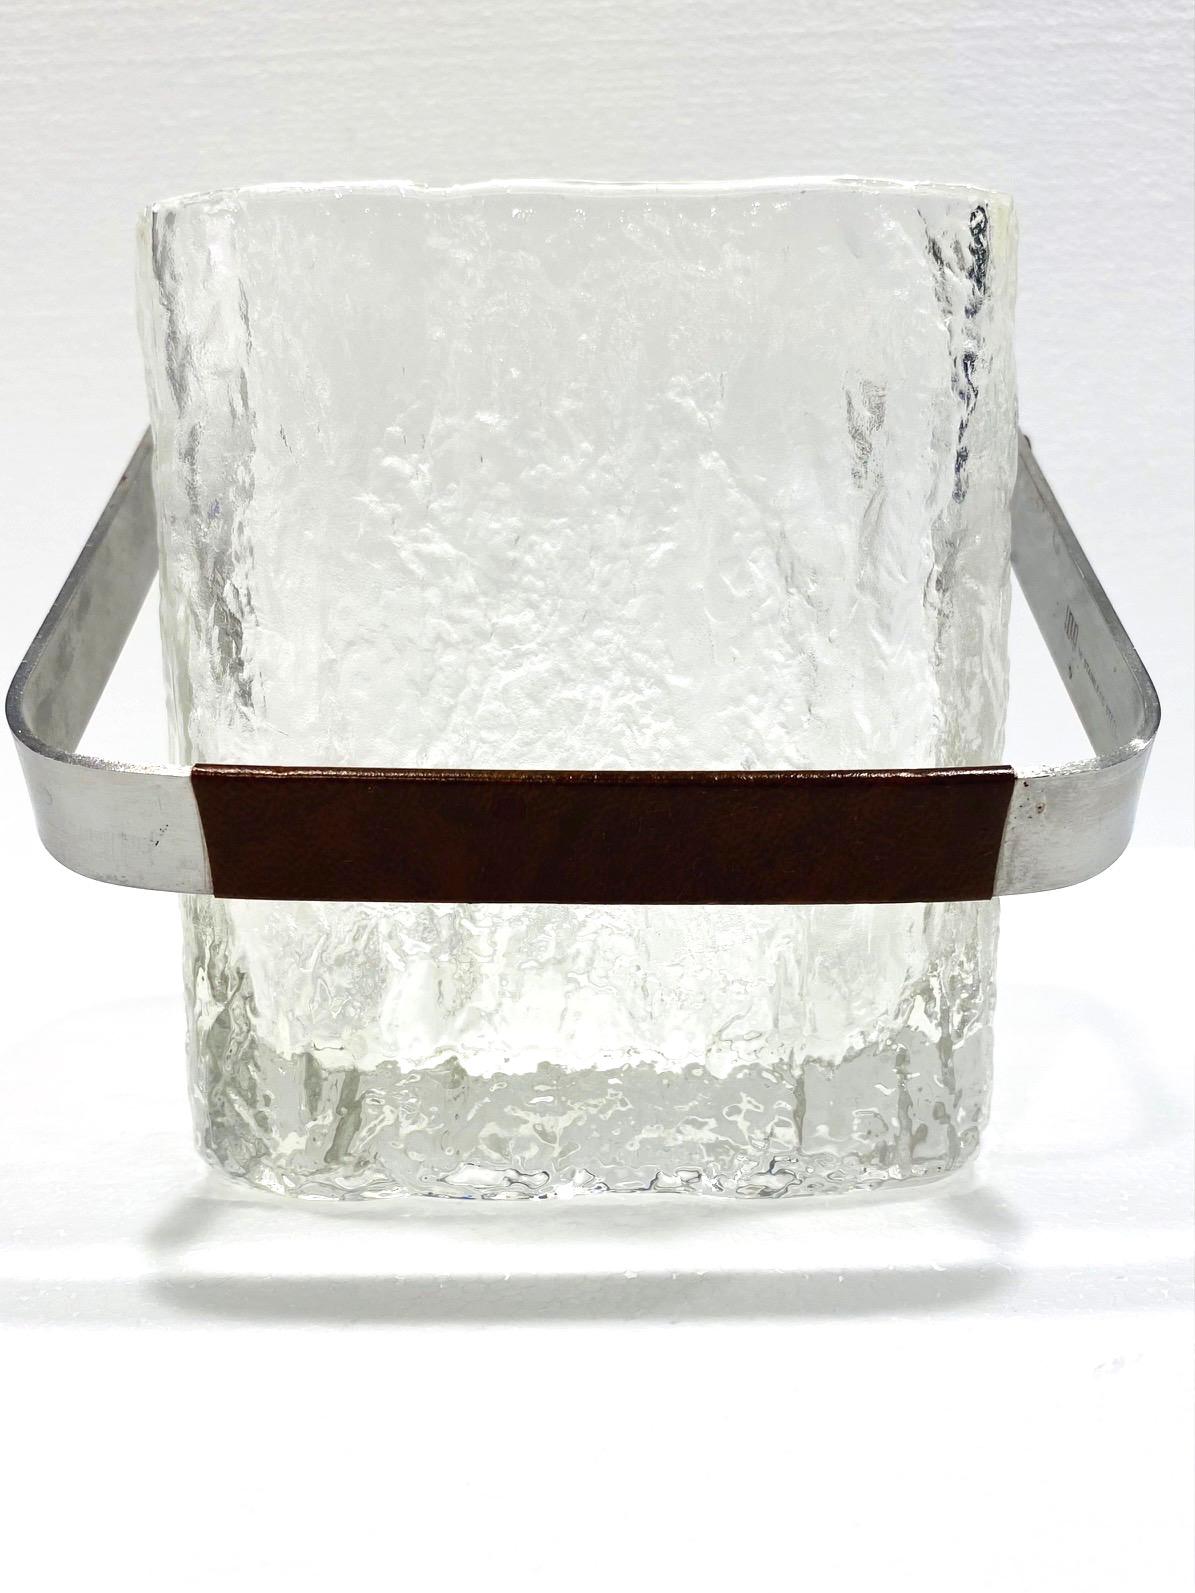 Hand-Crafted Mid-Century Modern Ice Bucket with Textured Ice Glass, Japan, circa 1960s